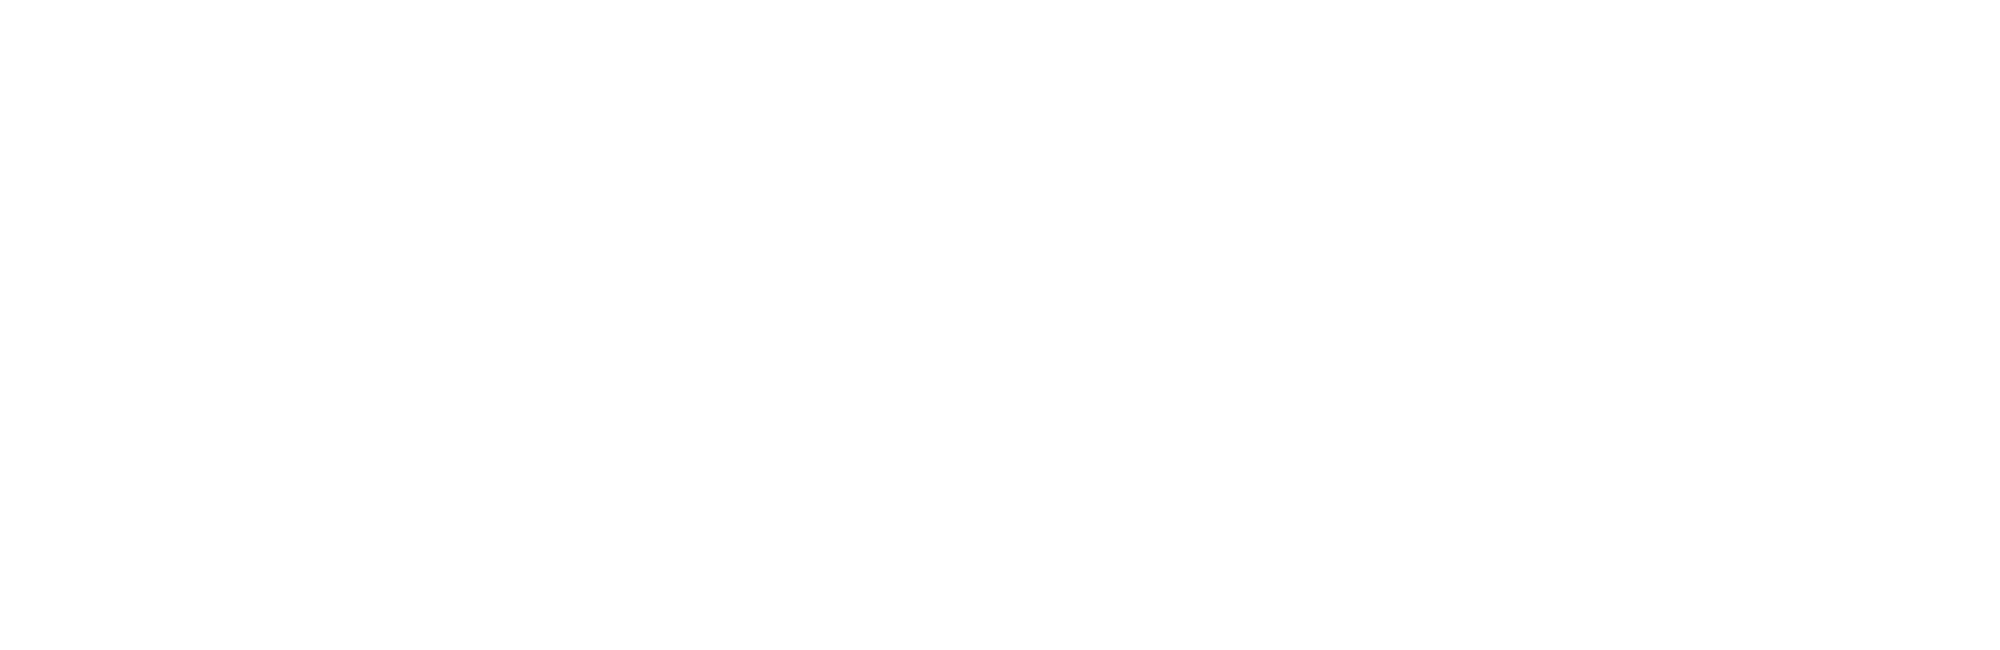 Cloudflare Authorised Service Delivery Partner logo